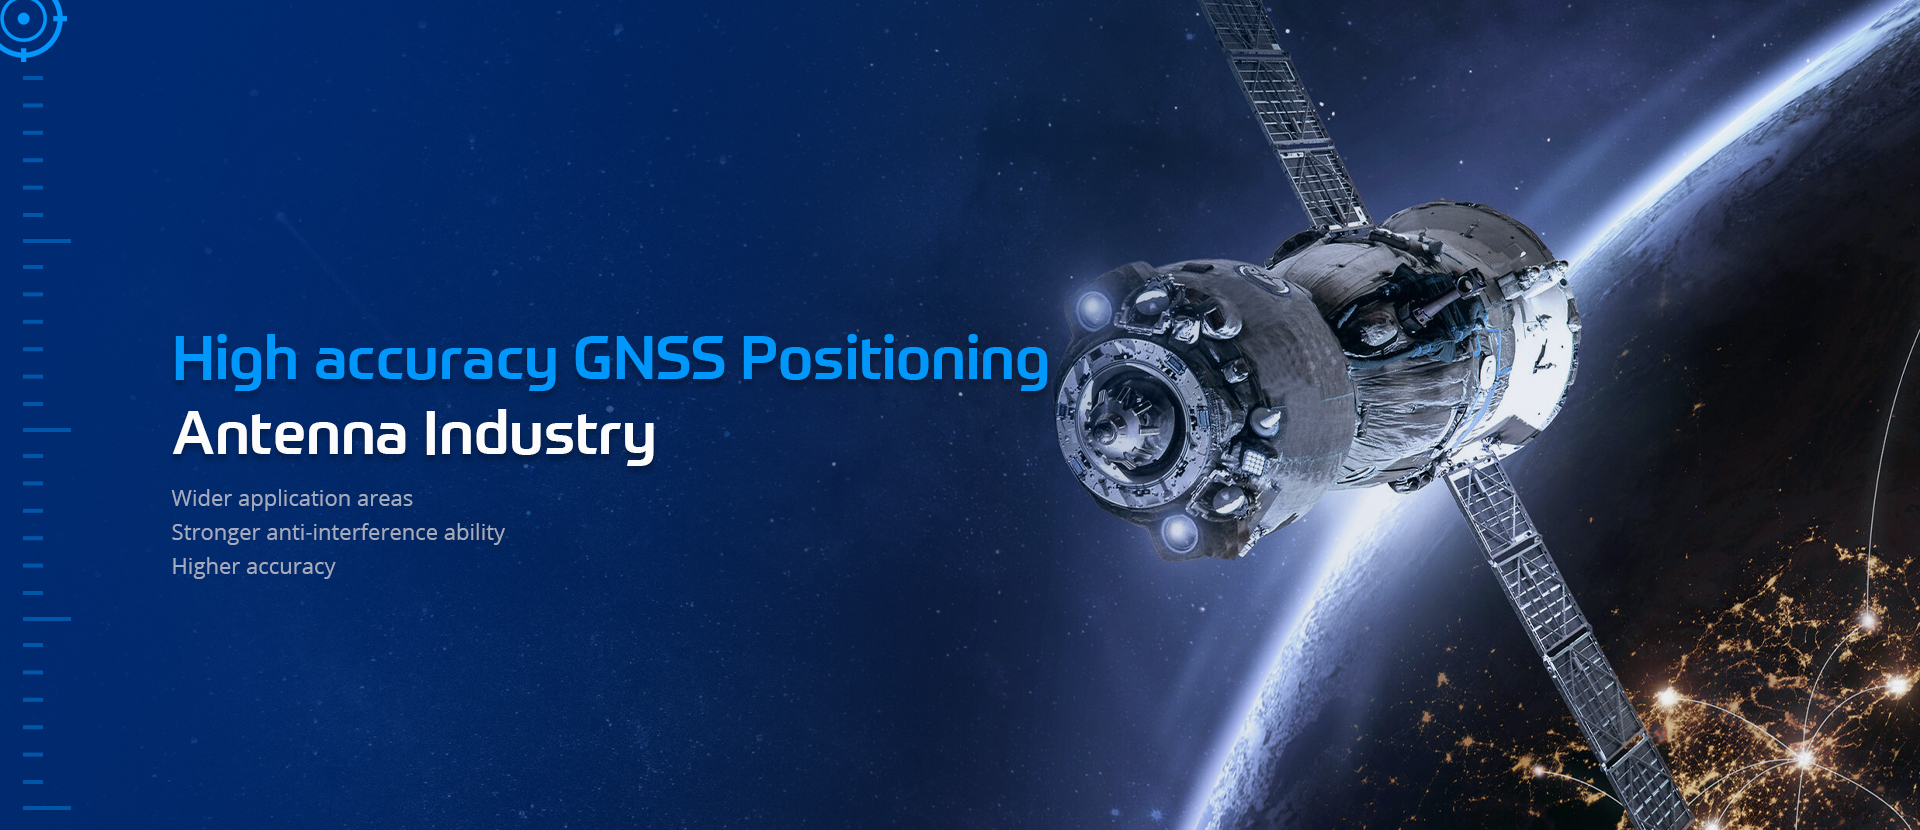 High Accuracy GNSS Positioning Antenna lndustry